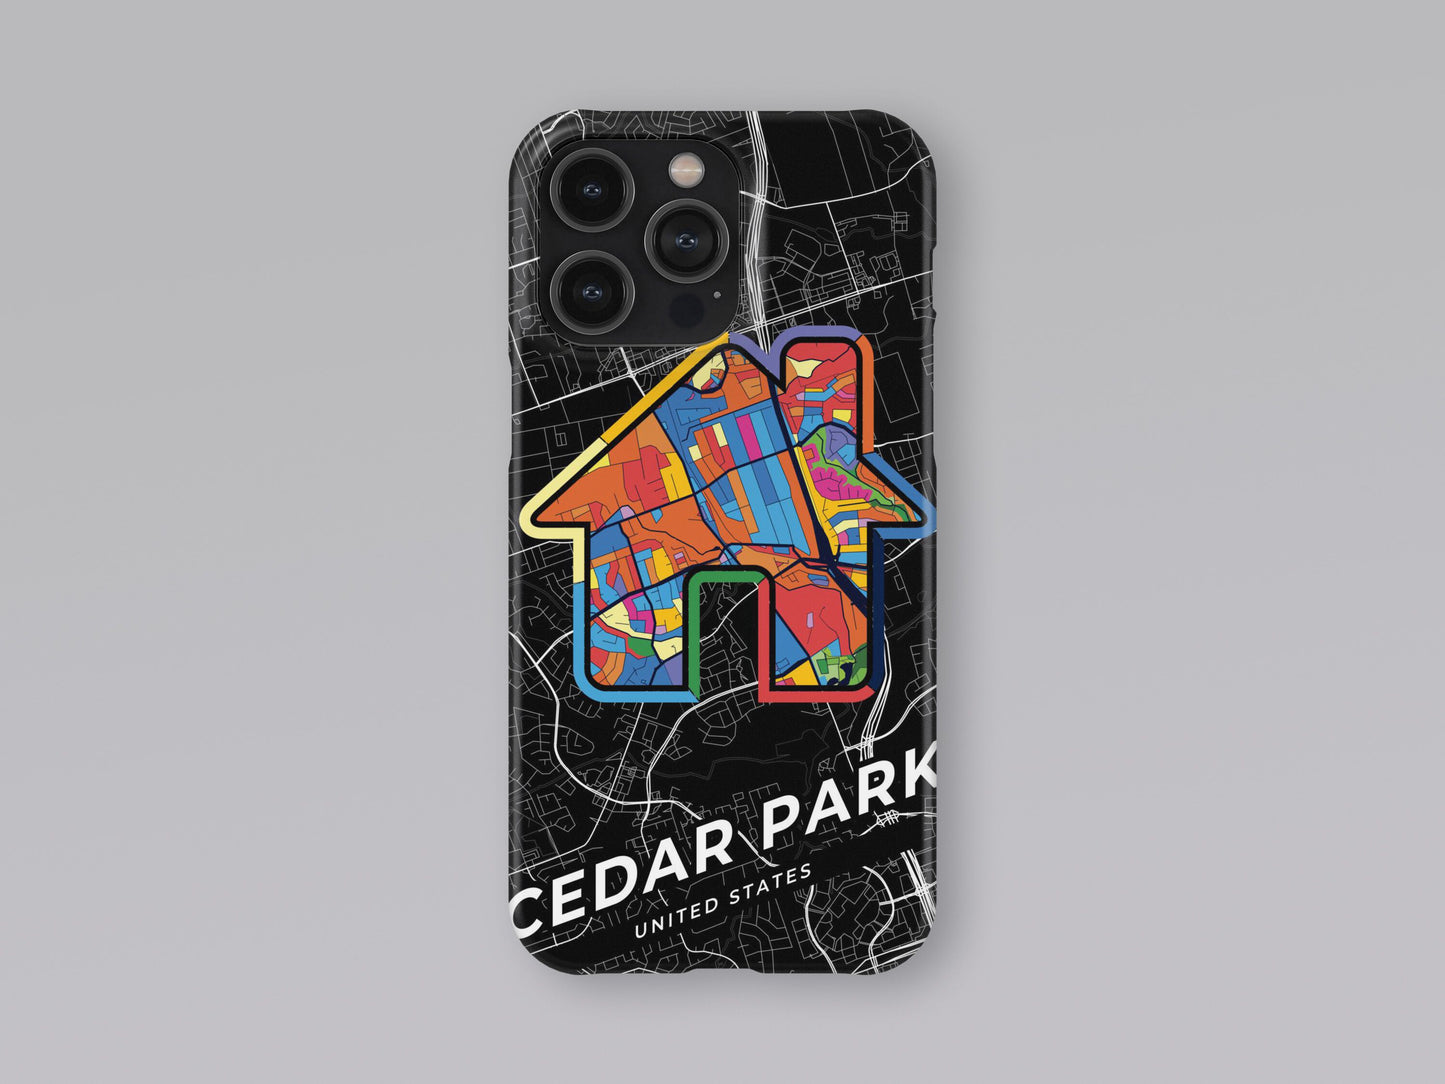 Cedar Park Texas slim phone case with colorful icon. Birthday, wedding or housewarming gift. Couple match cases. 3